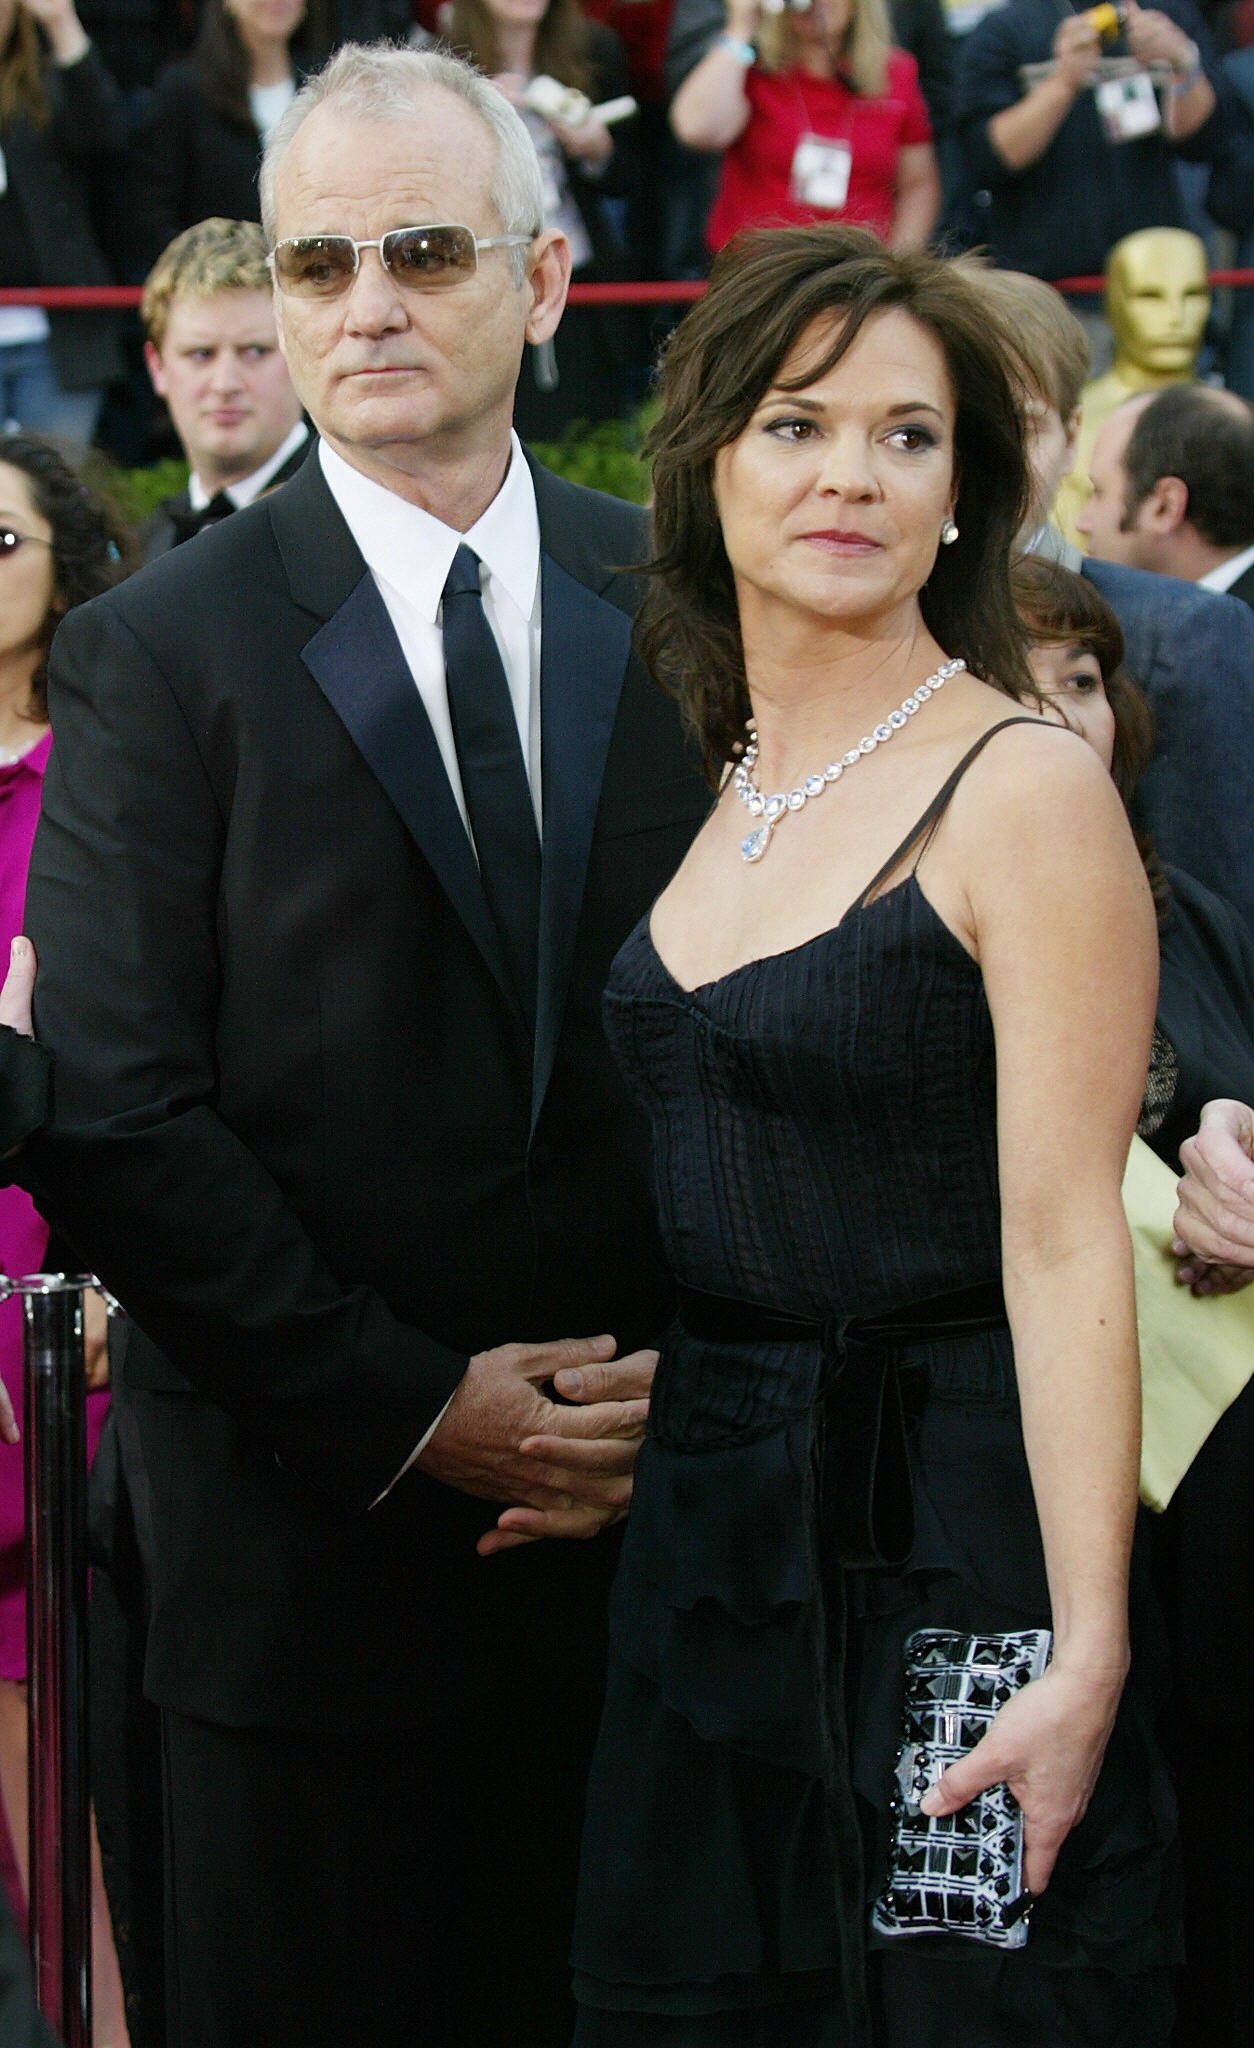 Bill Murray and Jennifer Butler, at the 76th Academy Awards ceremony hosted in the Kodak Theatre in Hollywood, California on February 29, 2004. | Source: Getty Images